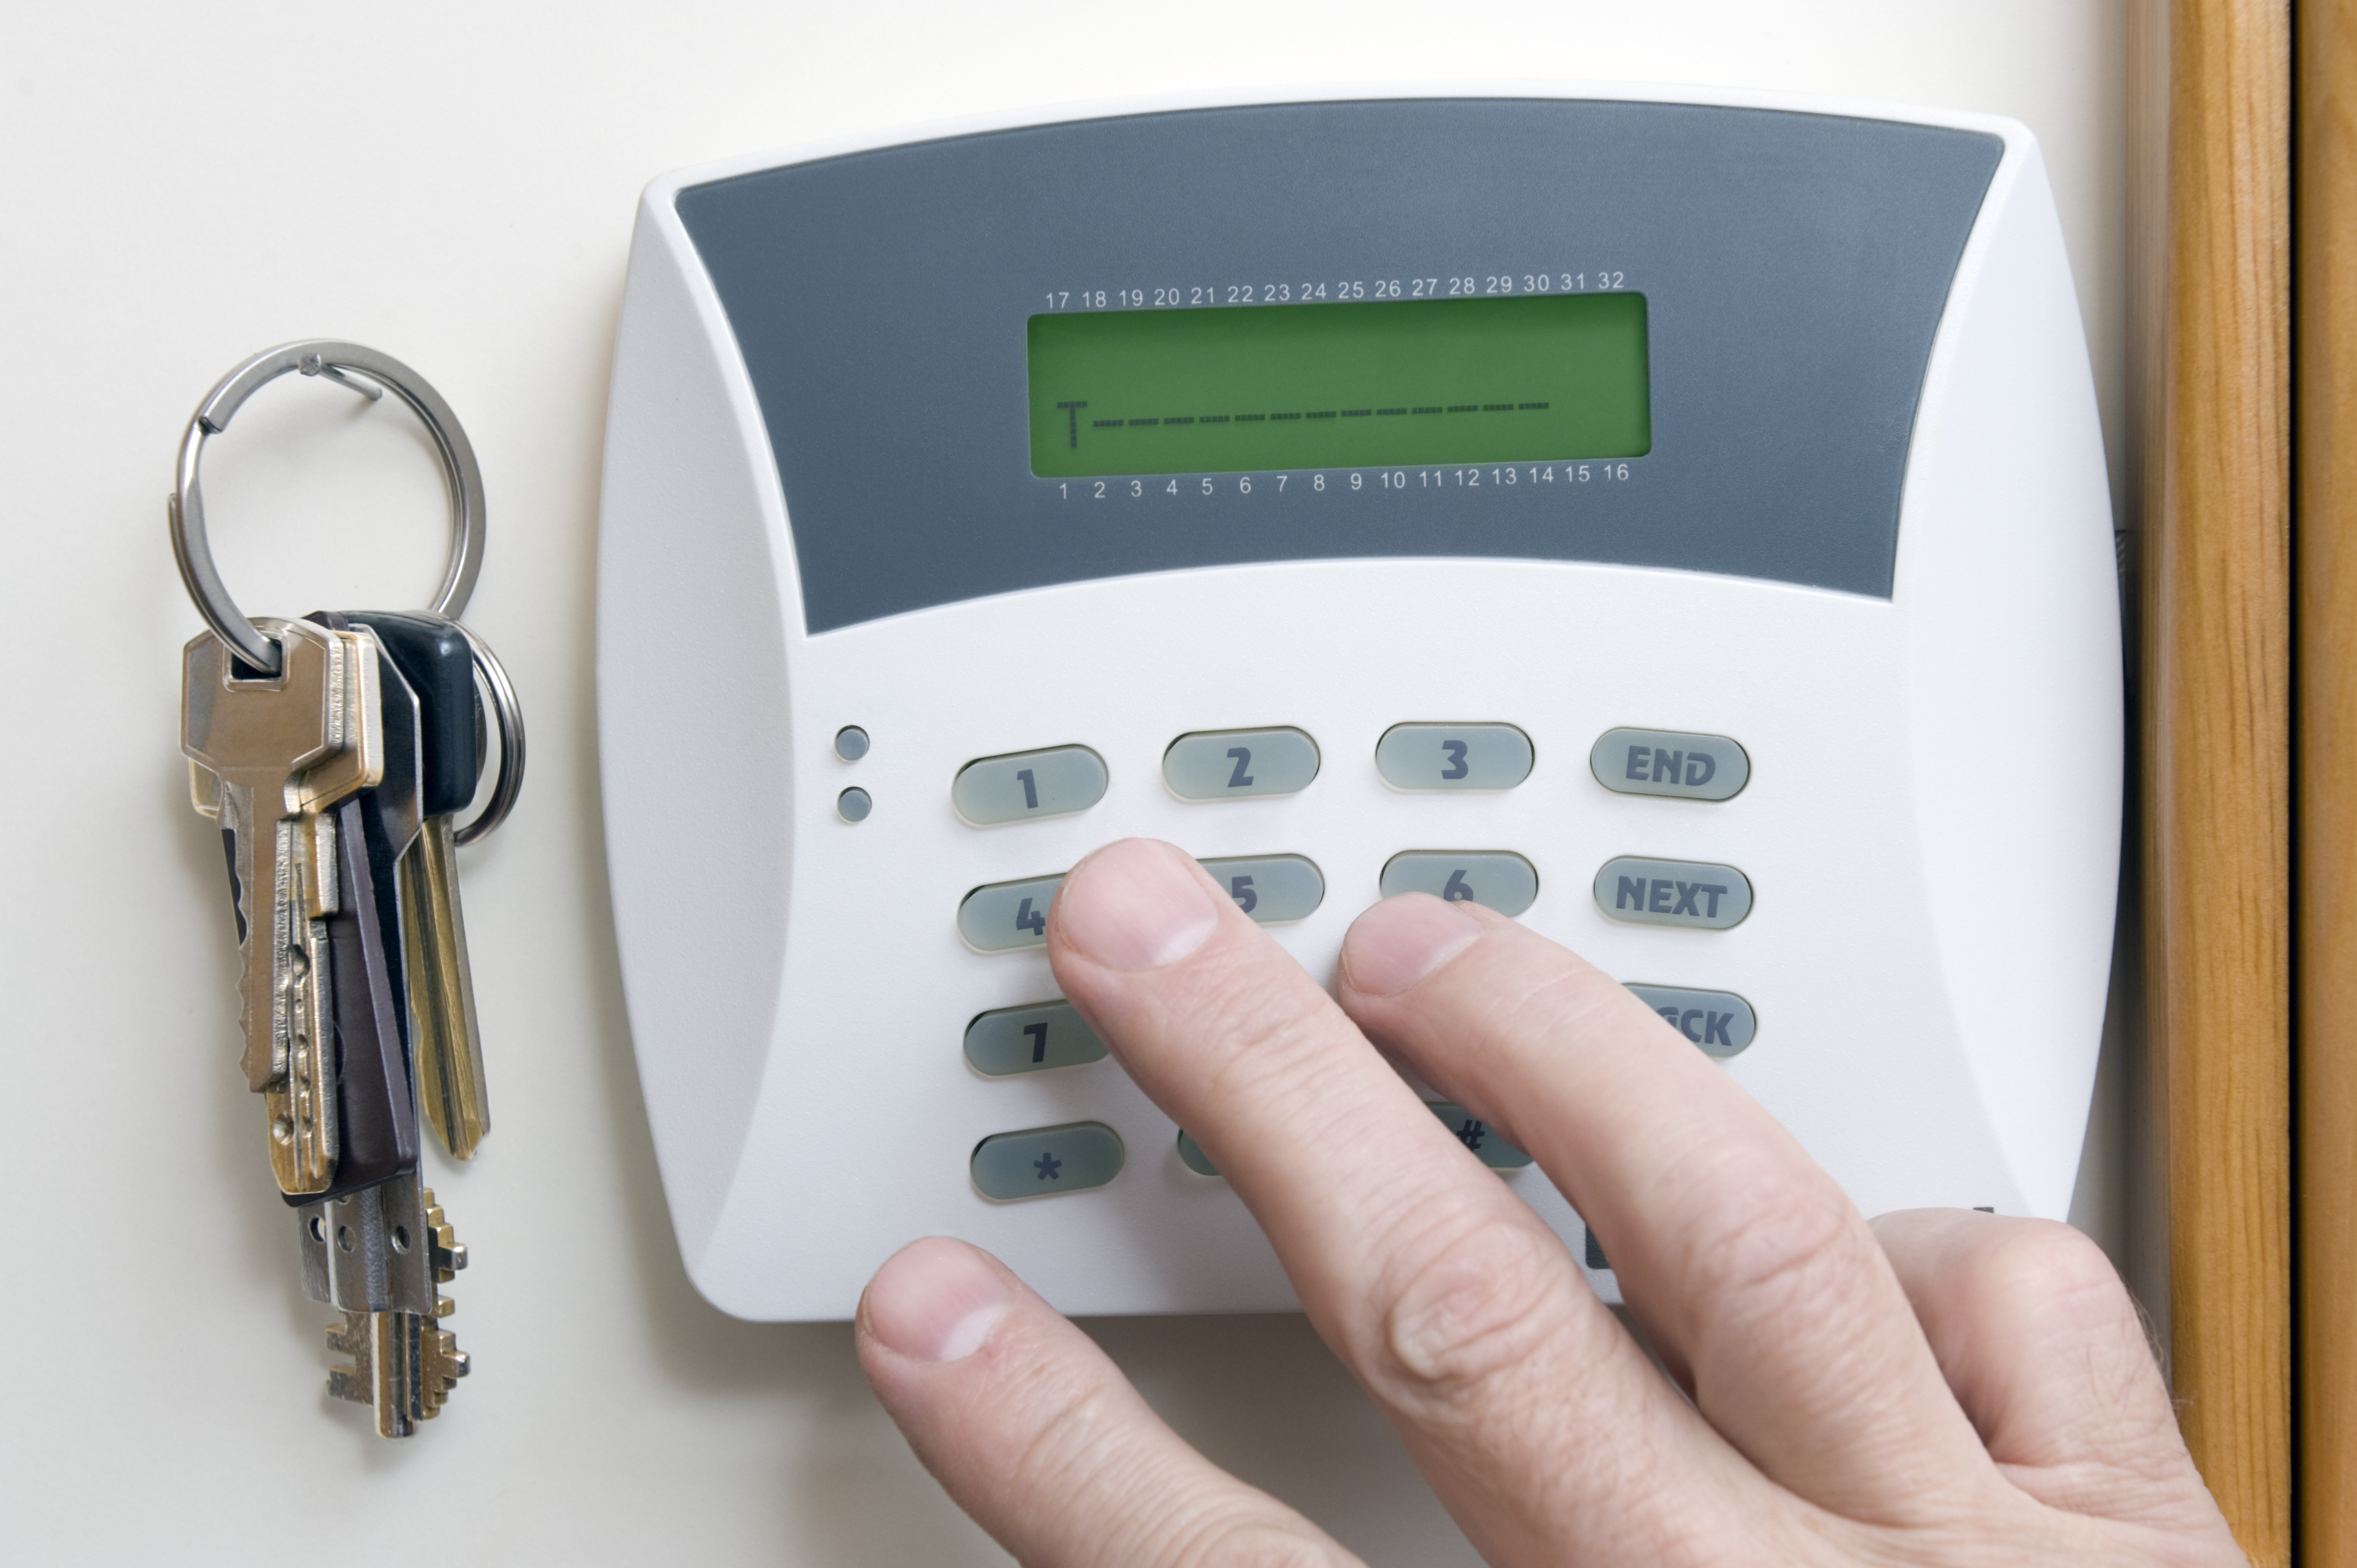 Tips for Purchasing a Home Security System